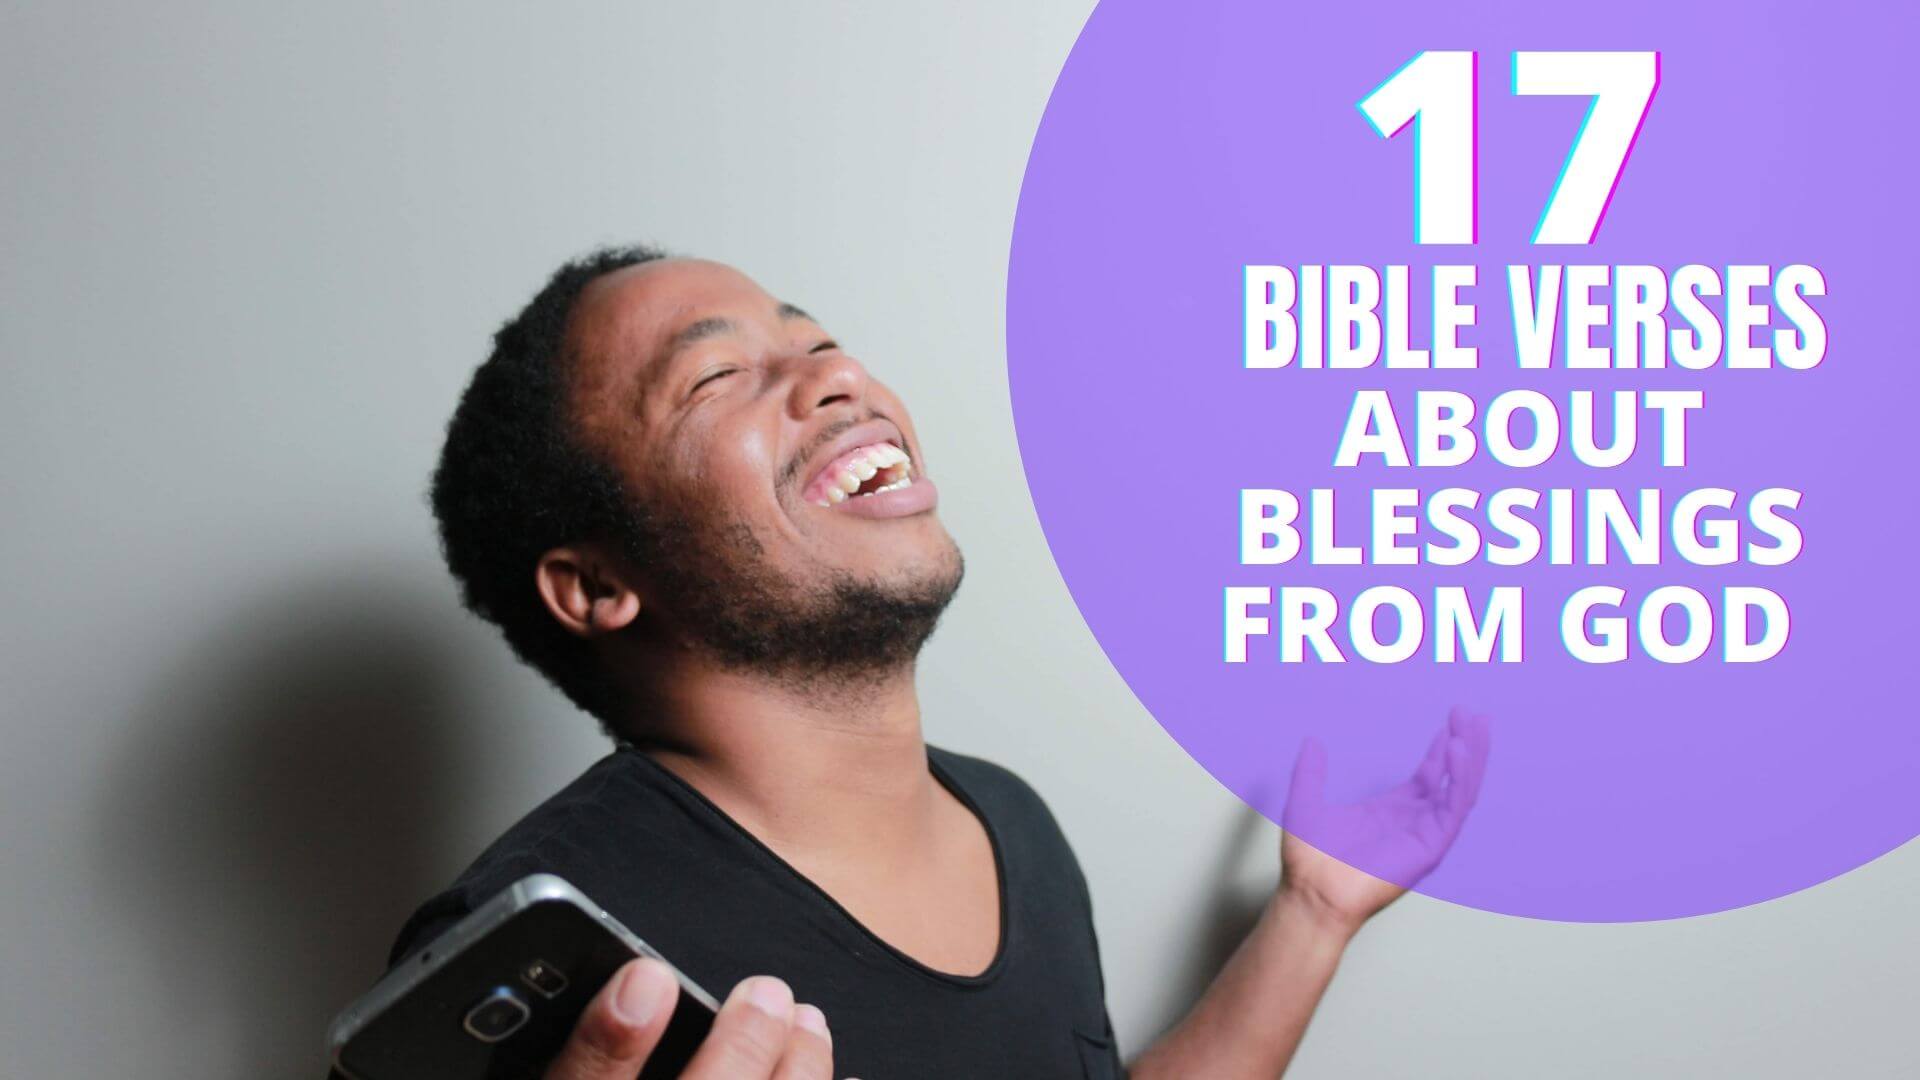 Bible verses about Blessings from God